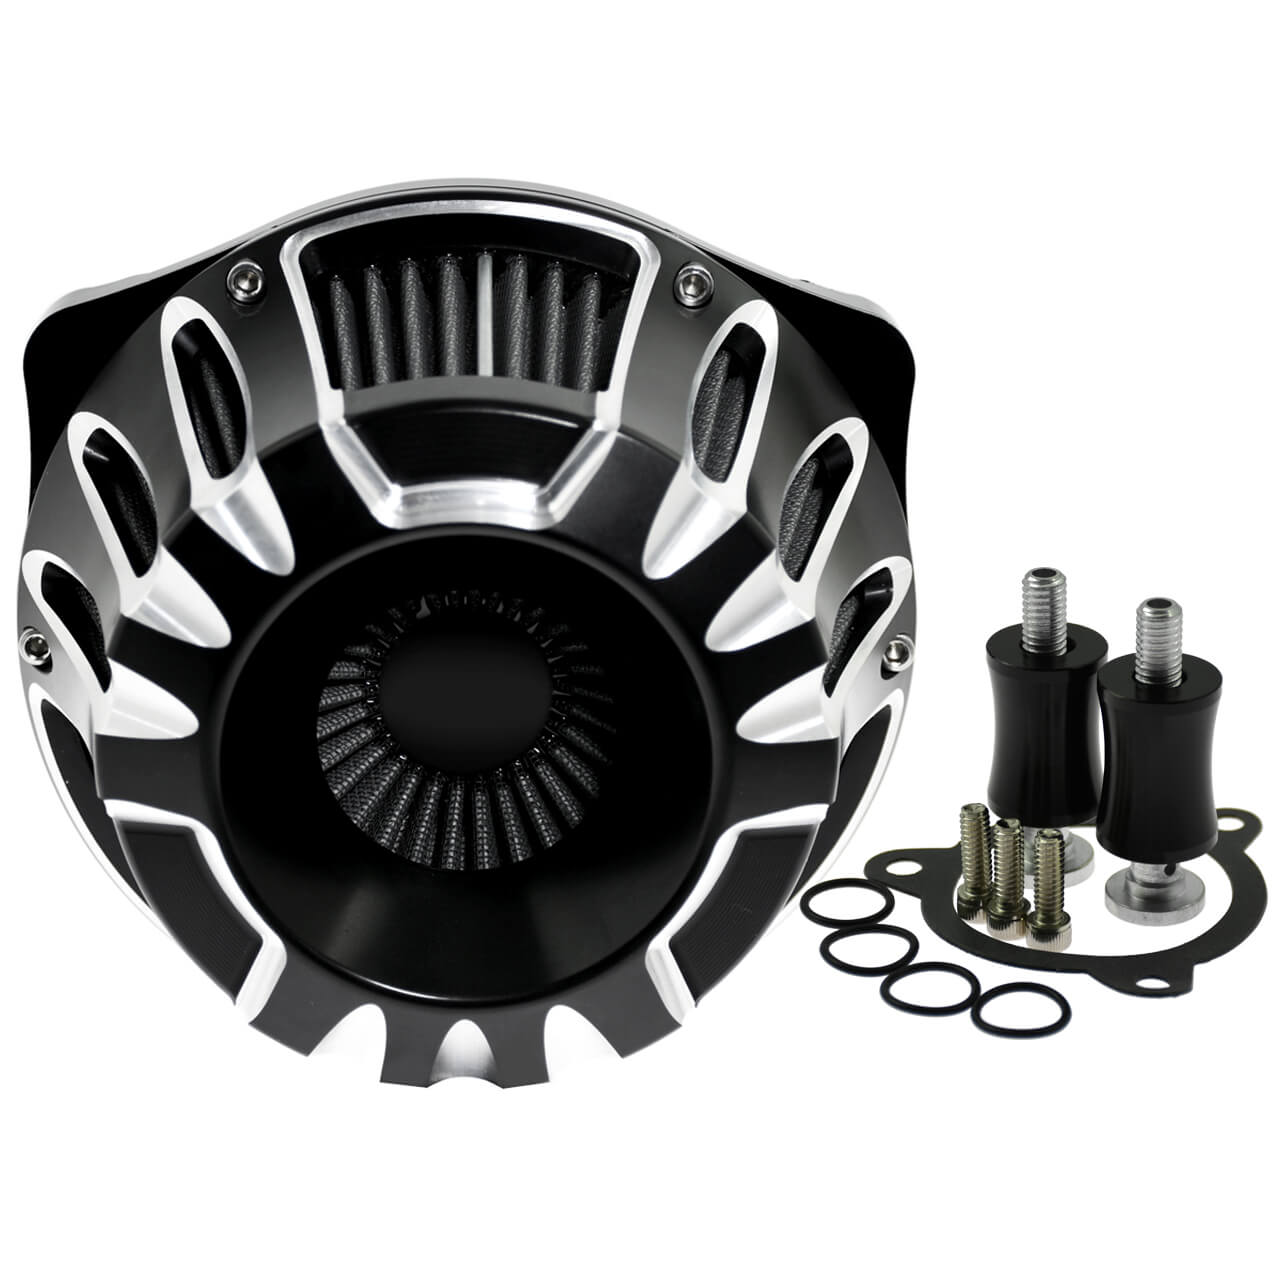 CNC Air Cleaner Intake System Fit for Harley Dyna Softail Touring Trike | Mactions